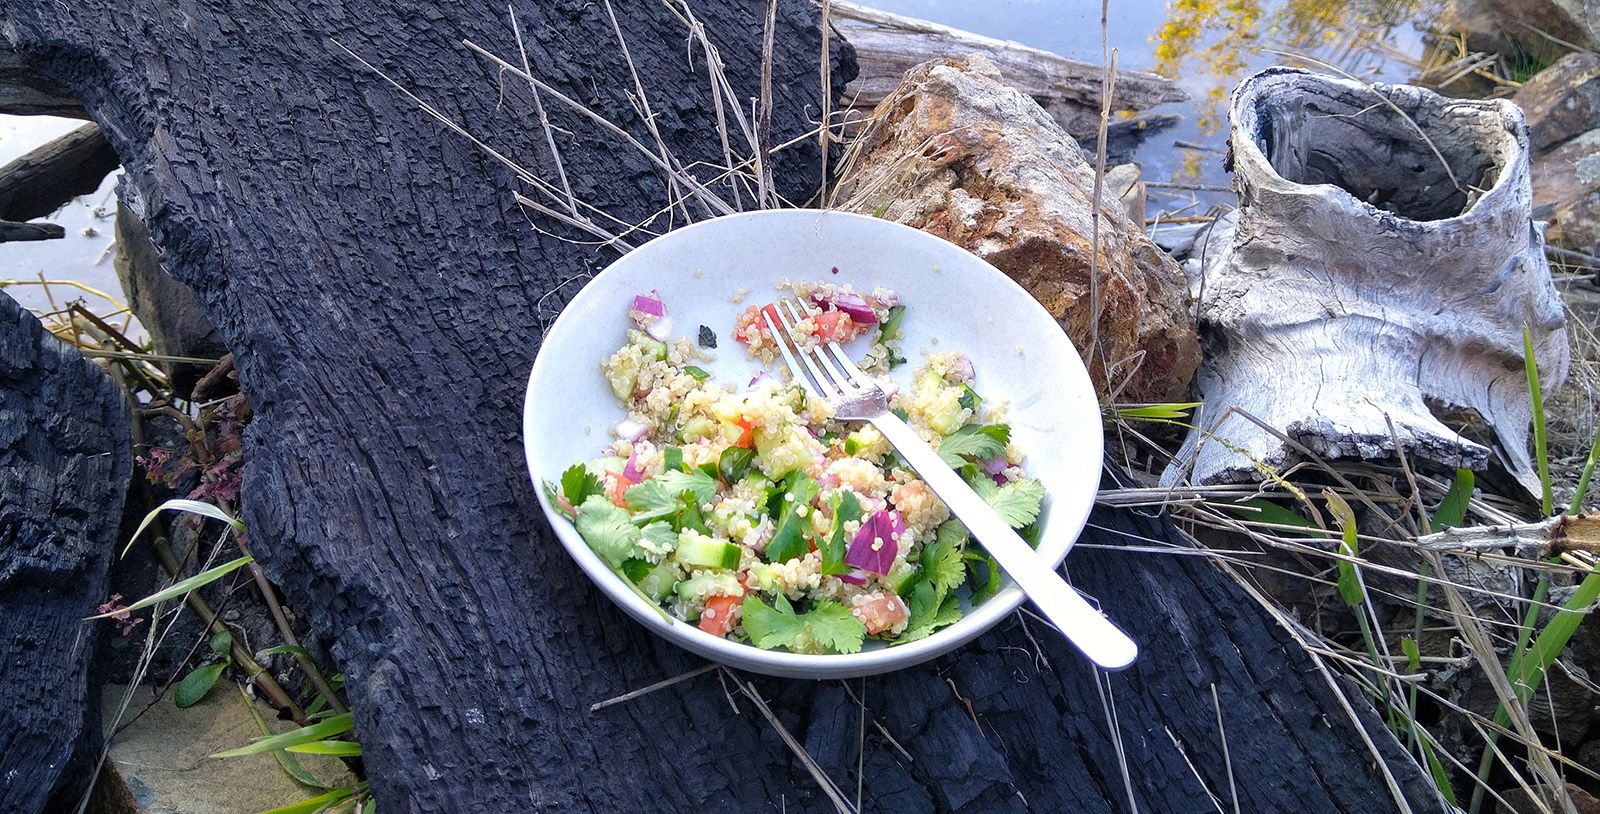 Minted quinoa salad is a fresh & fluffy dish on a hot sunny day - Victoria Waghorn